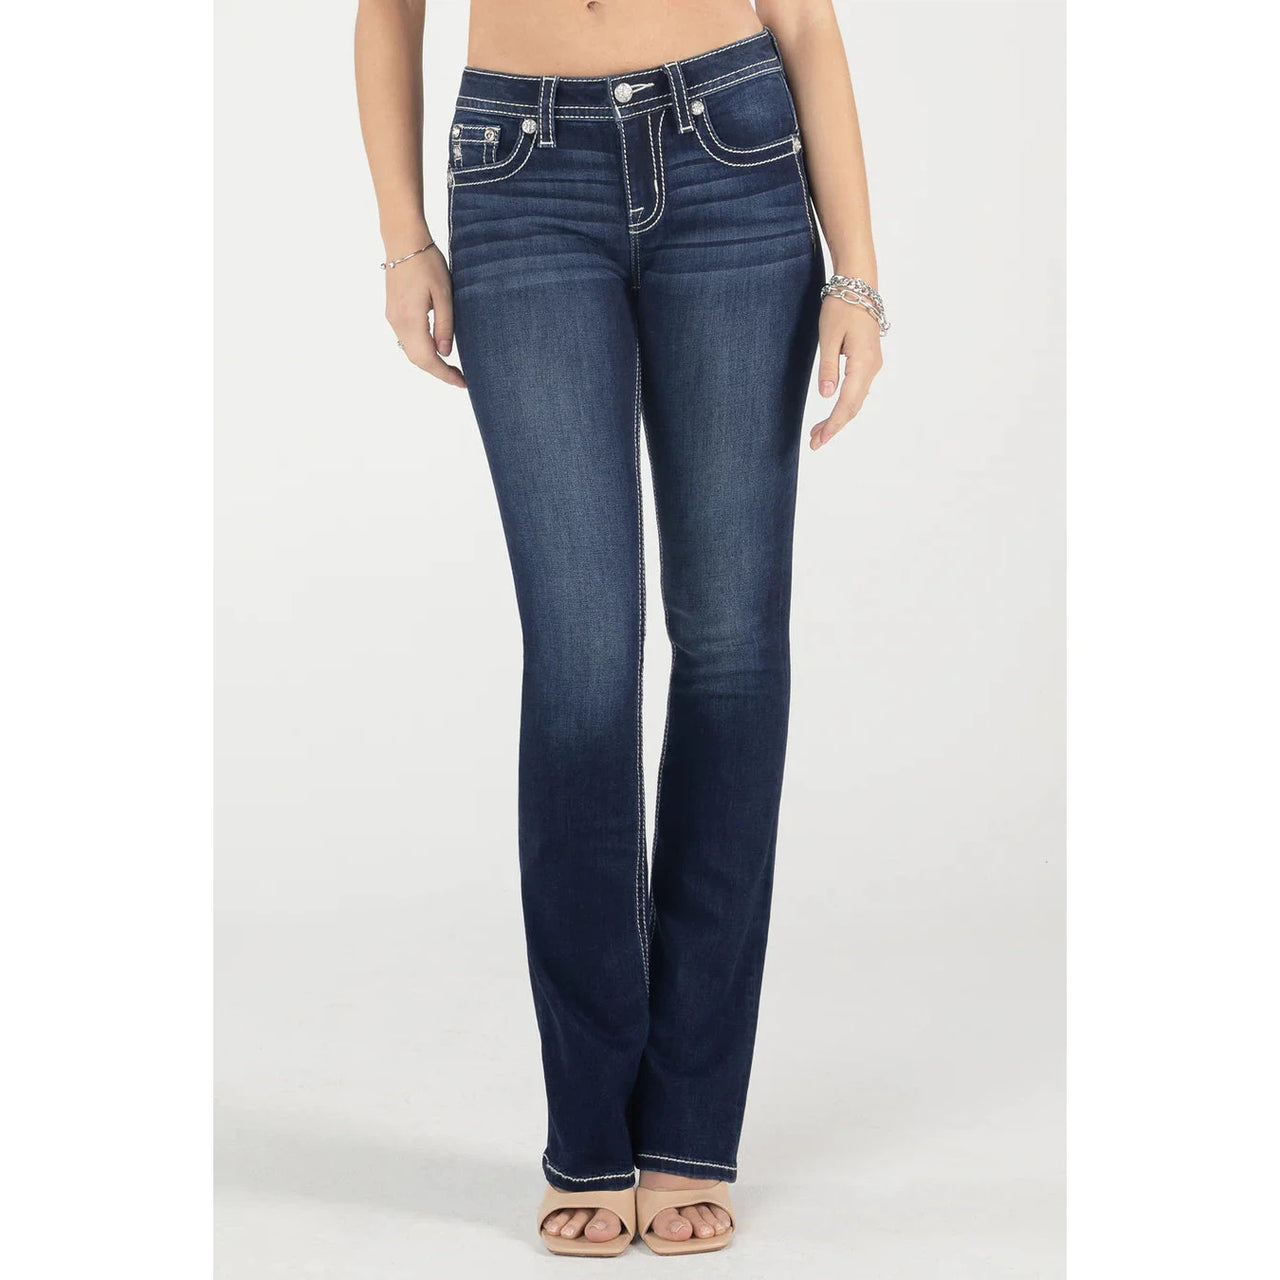 Miss Me Women's Berry & Gold Mid Rise Bootcut Jeans - Dark Wash